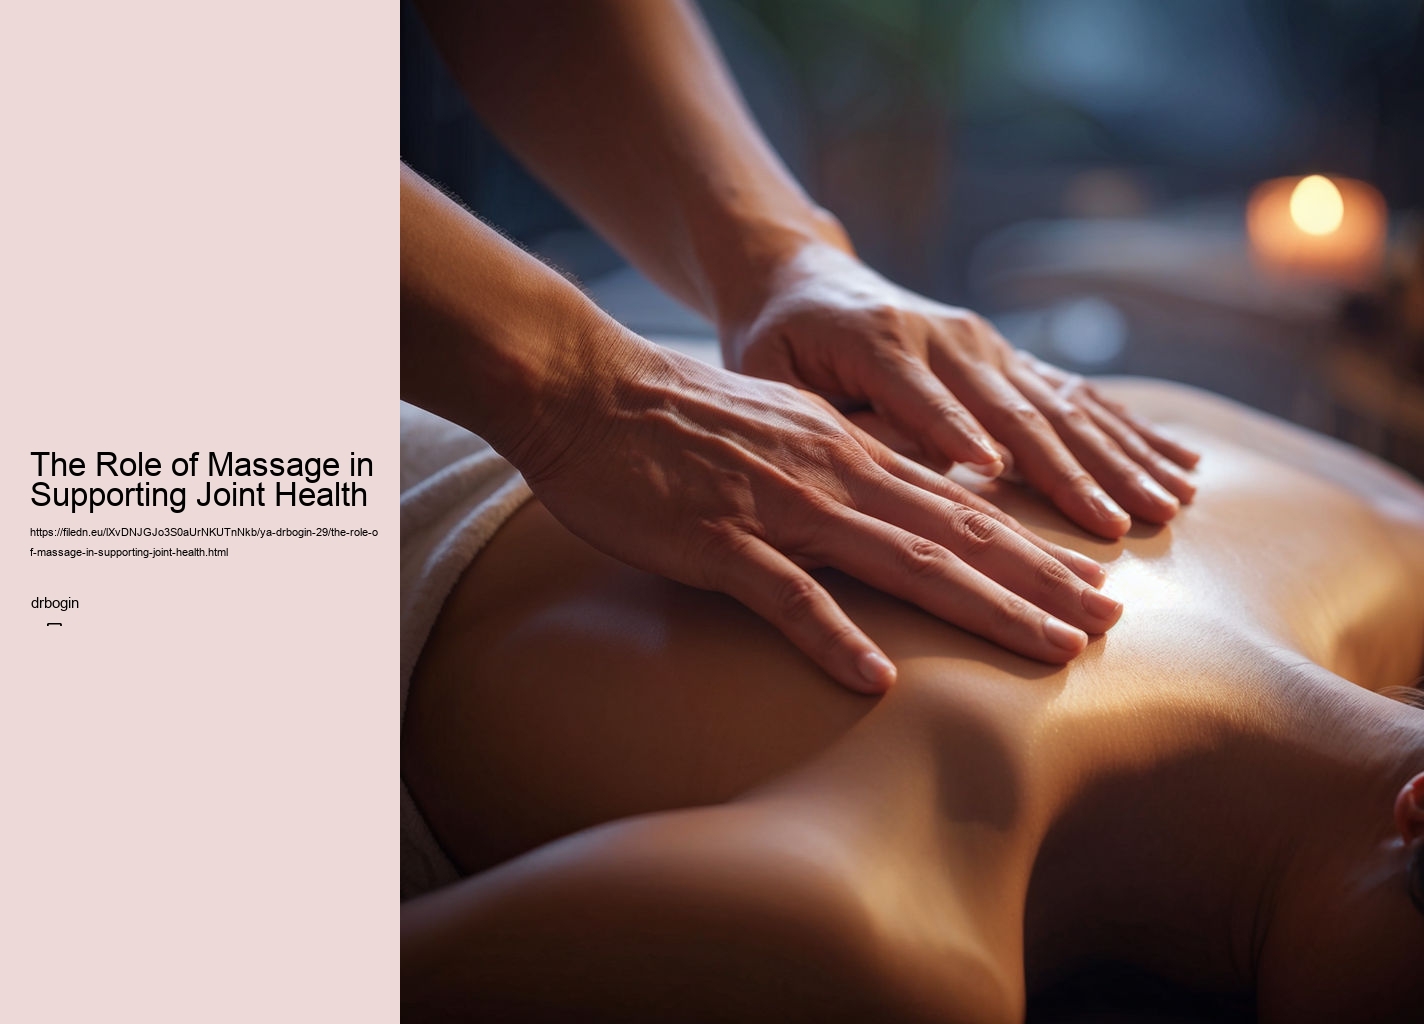 The Role of Massage in Supporting Joint Health